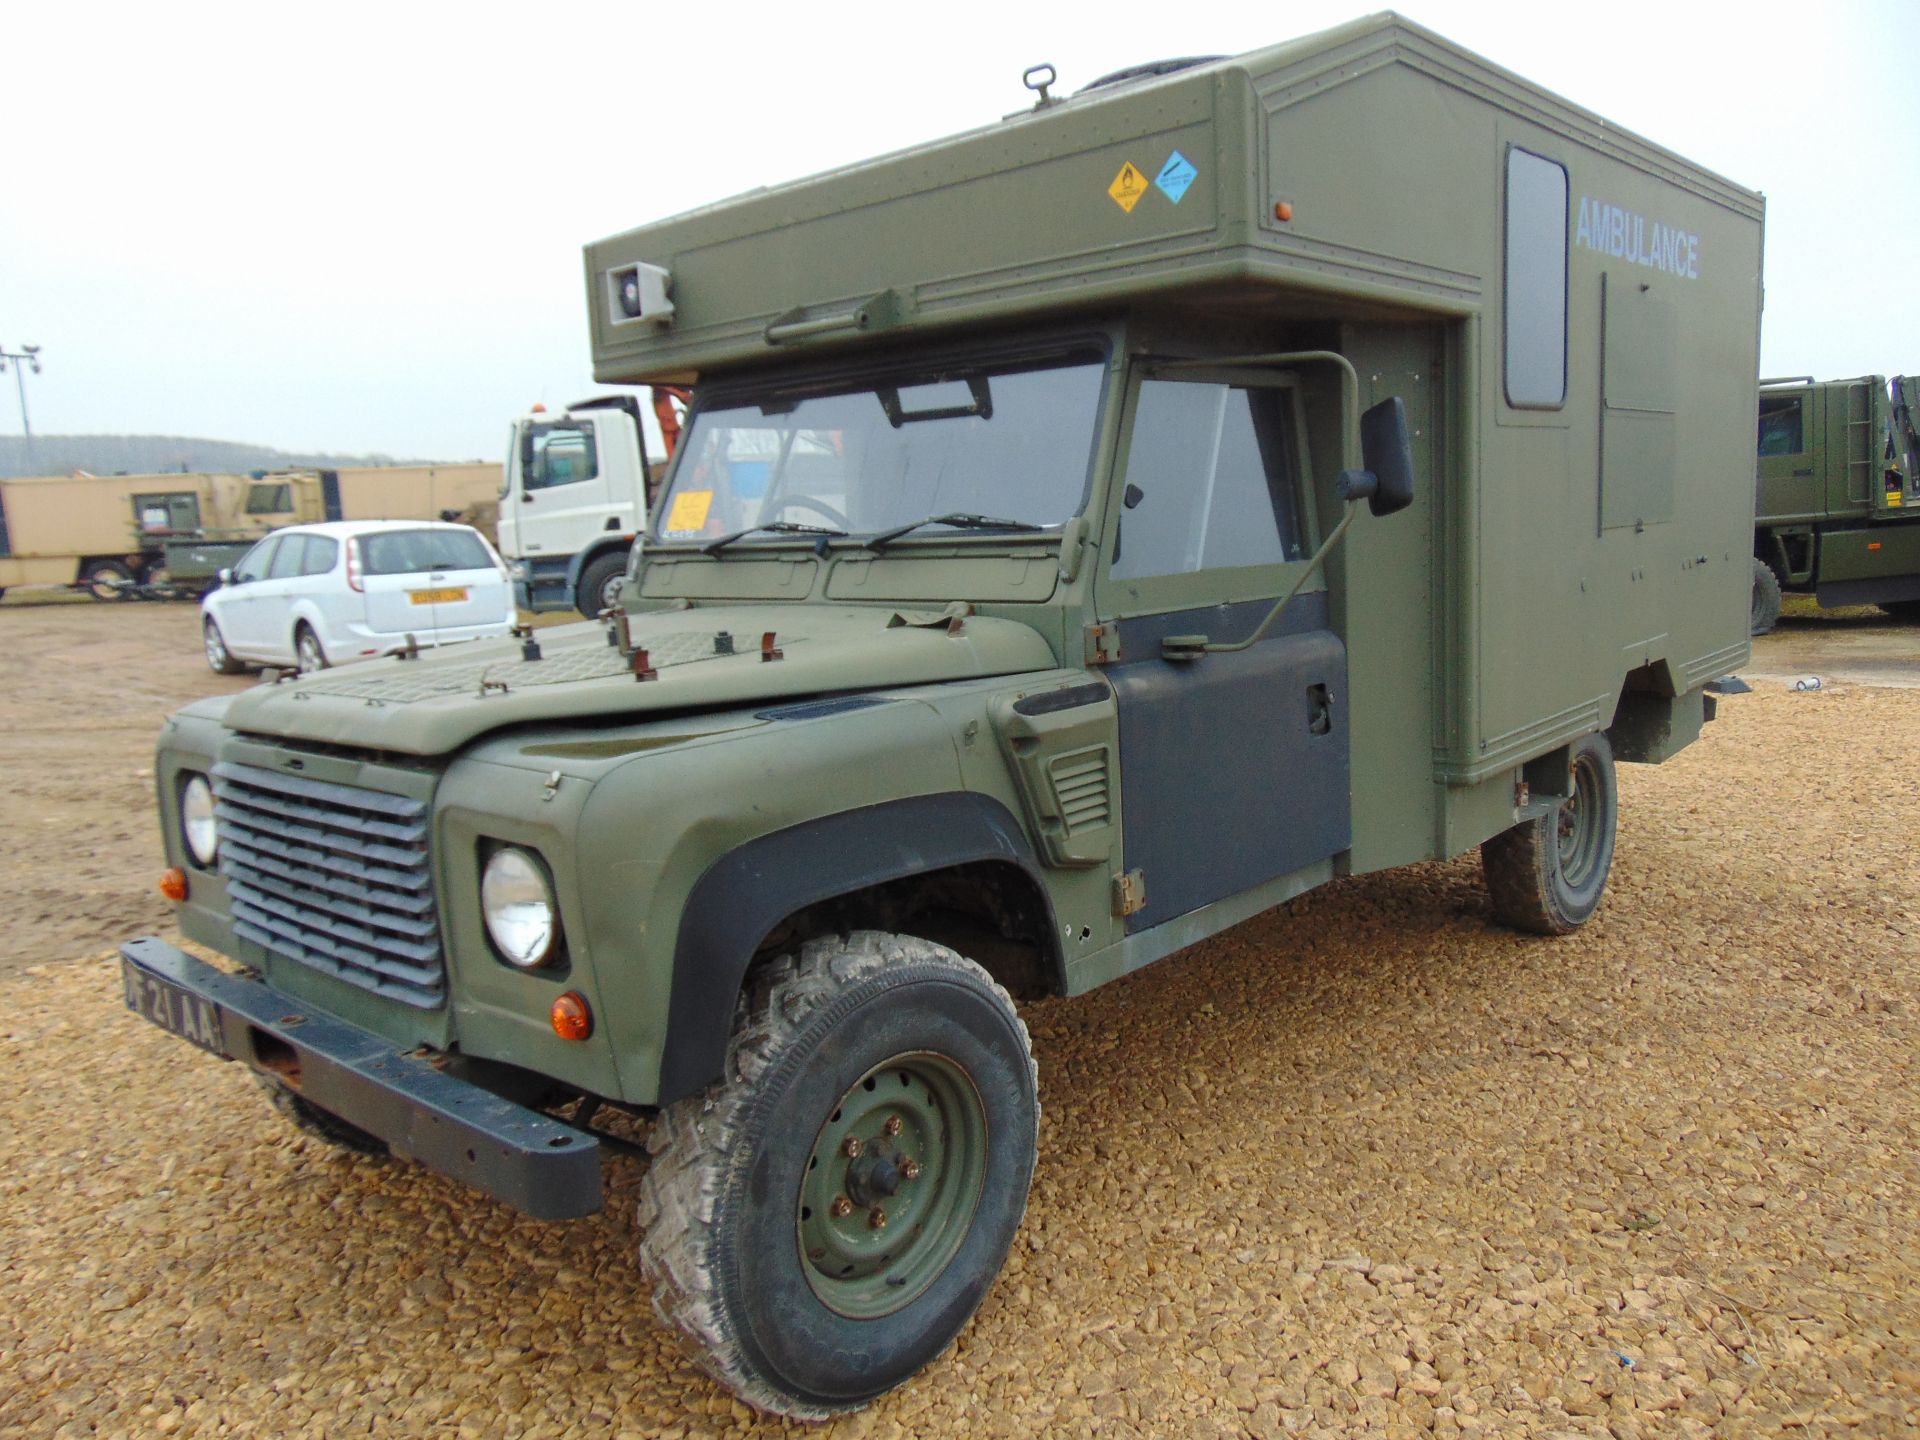 Military Specification Land Rover Wolf 130 ambulance - Image 3 of 19